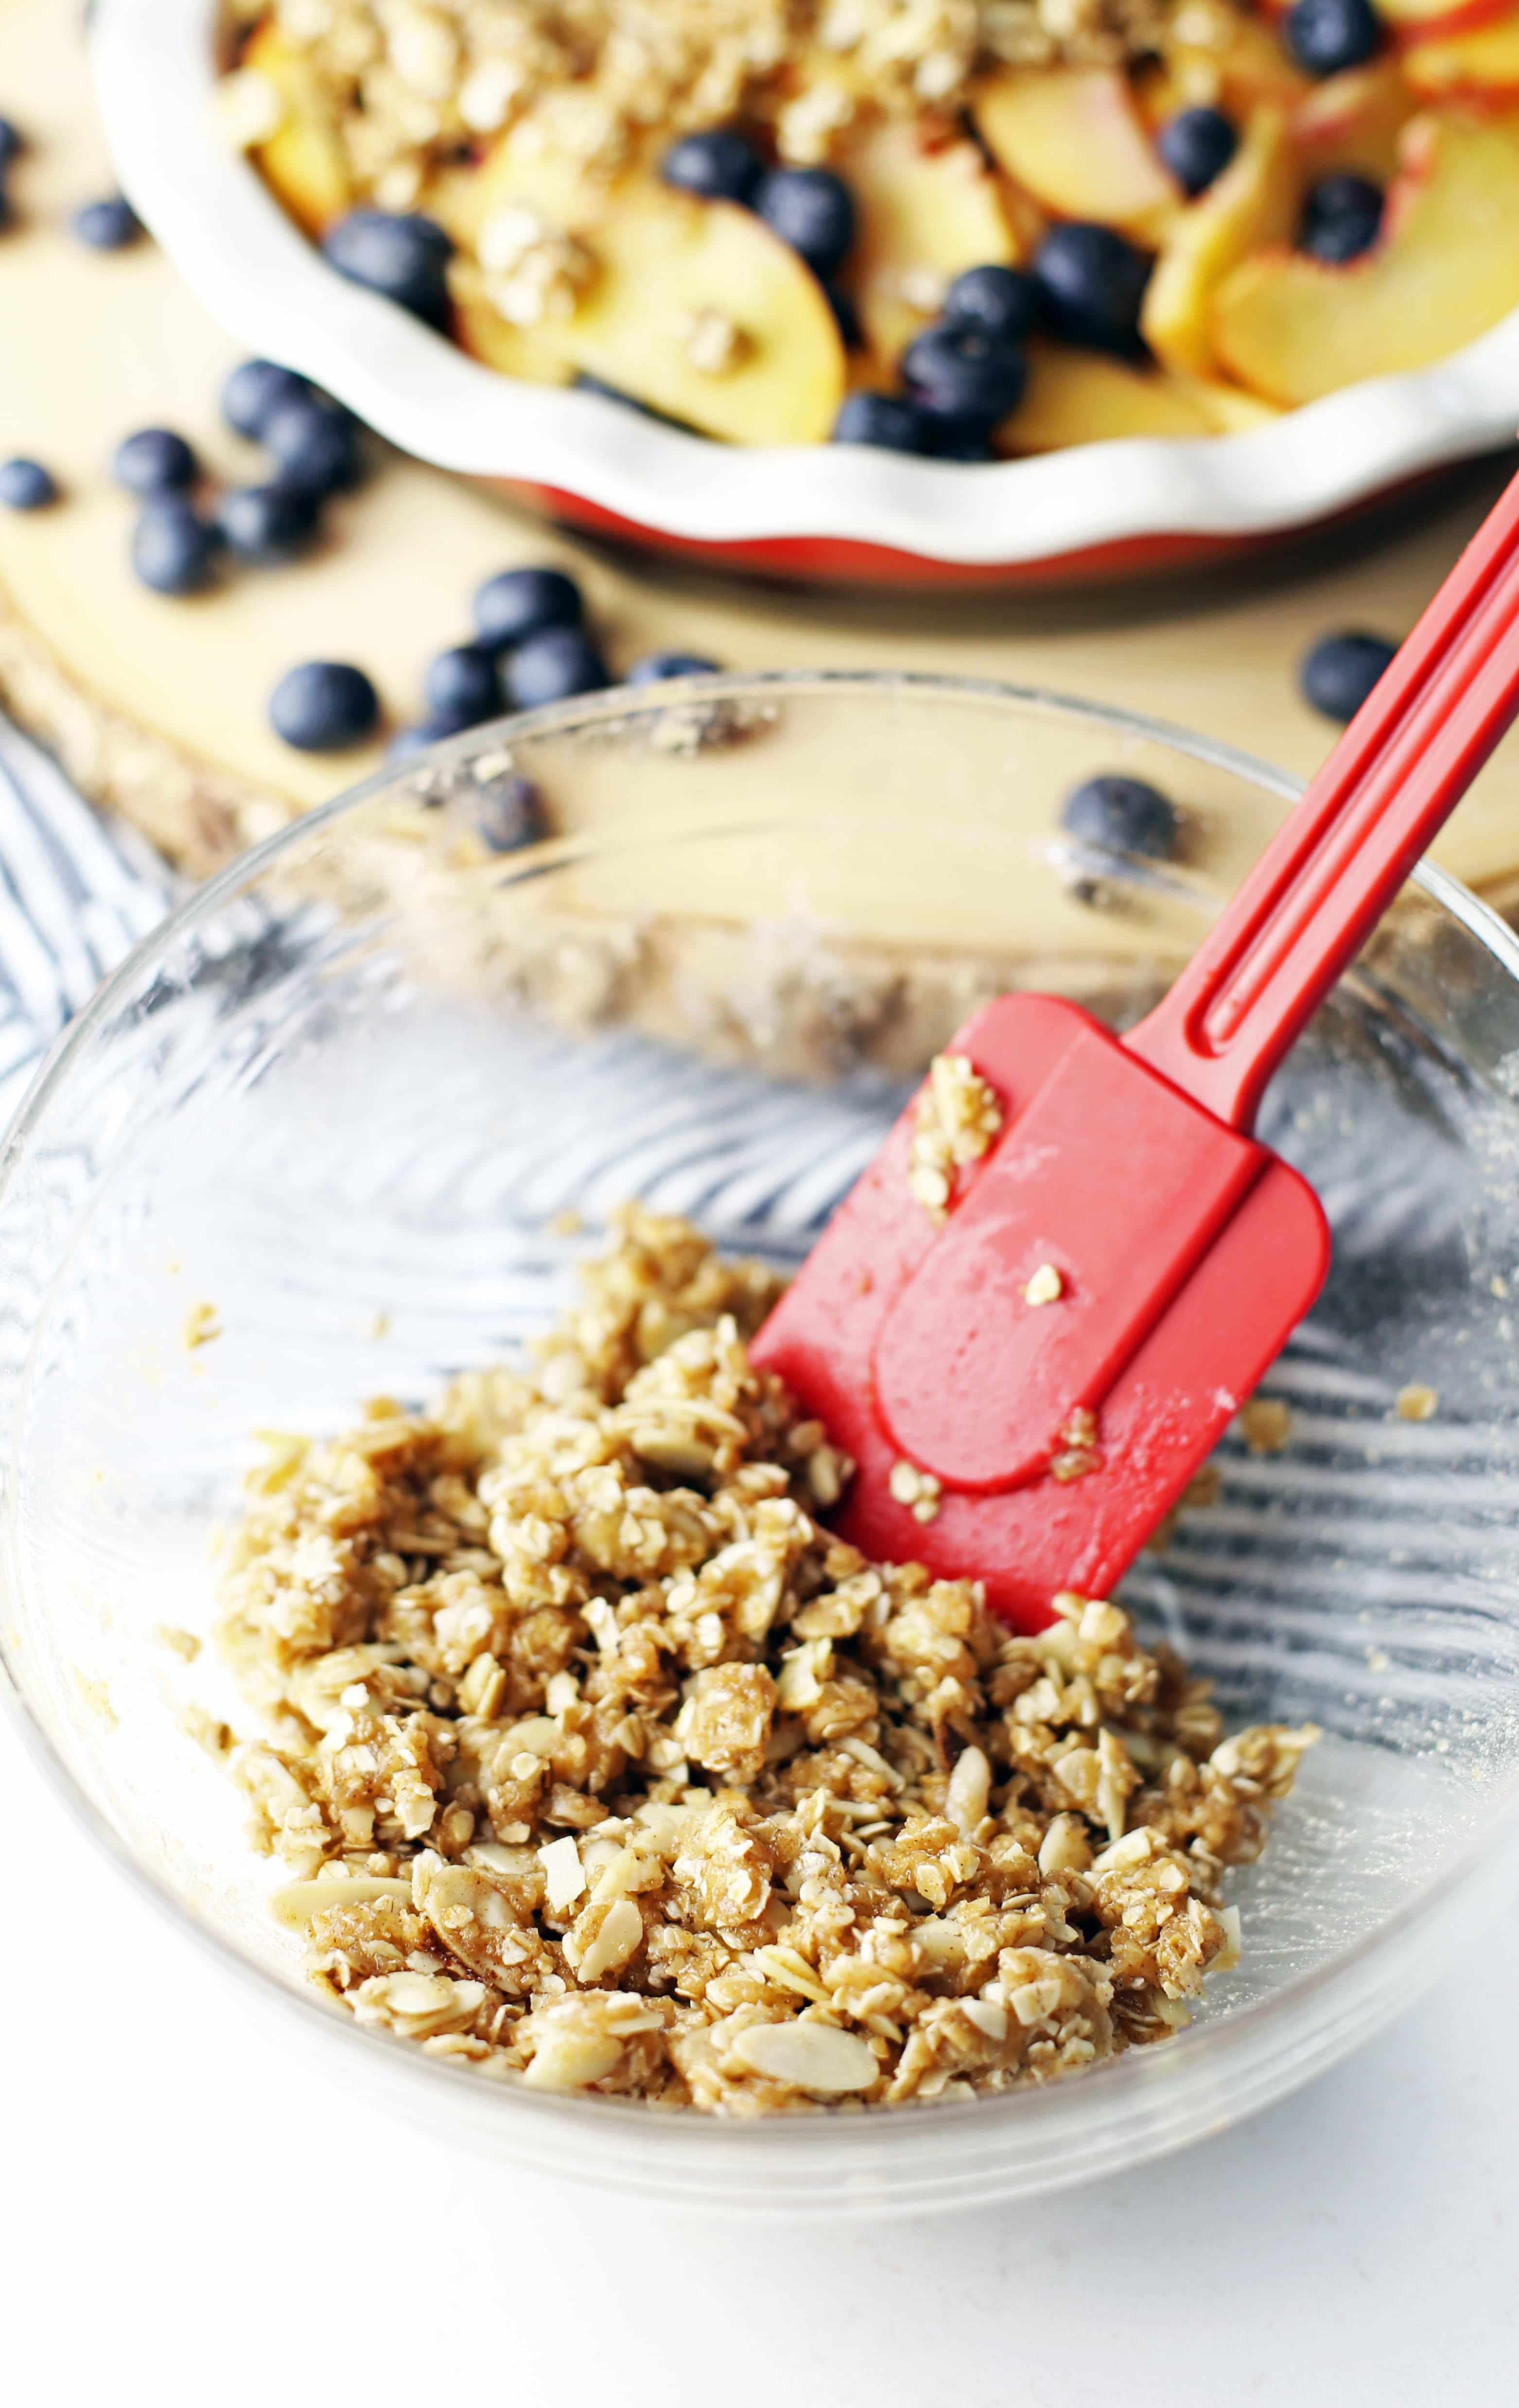 Almond oat topping ingredients combined together in a glass bowl.